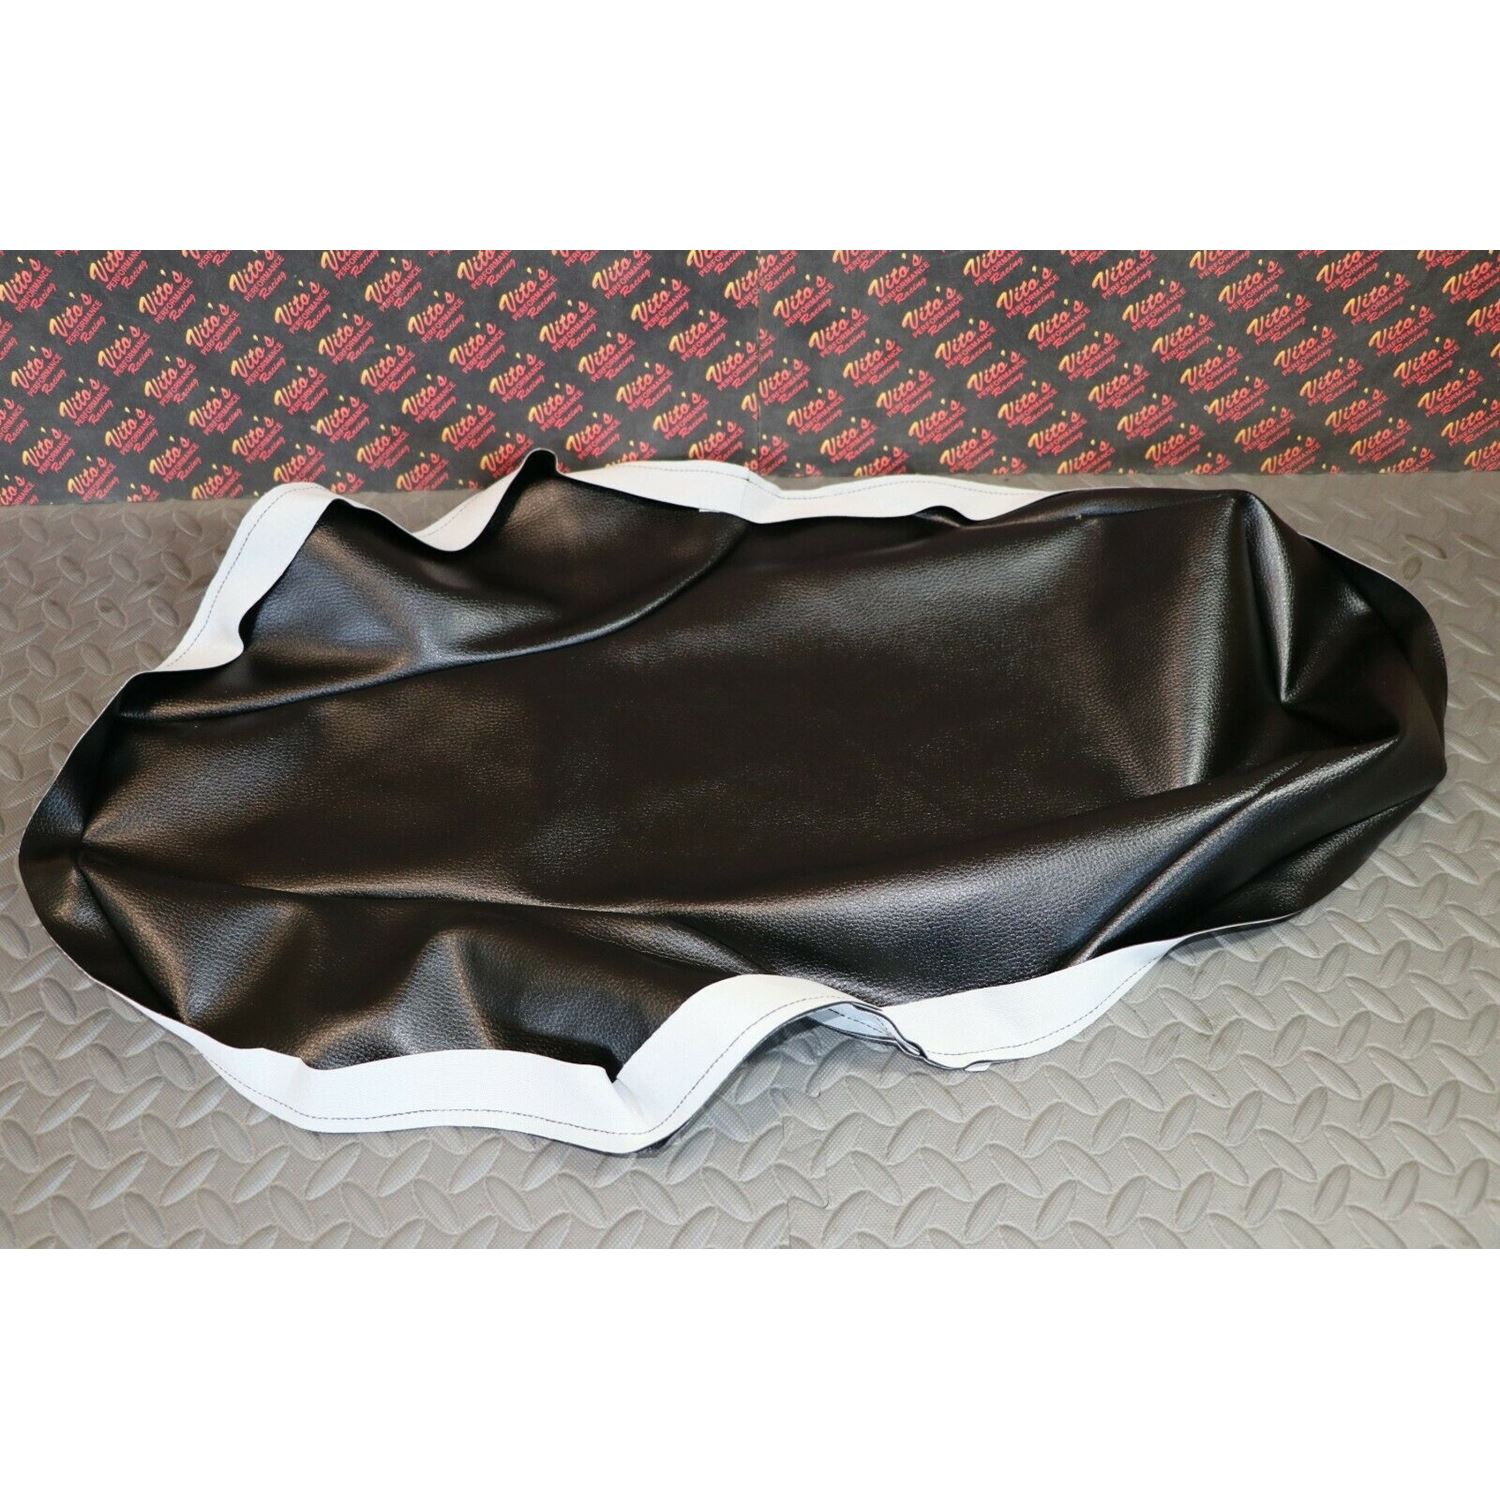 NEW SEAT COVER ONLY 1987-2006 Yamaha Banshee cover